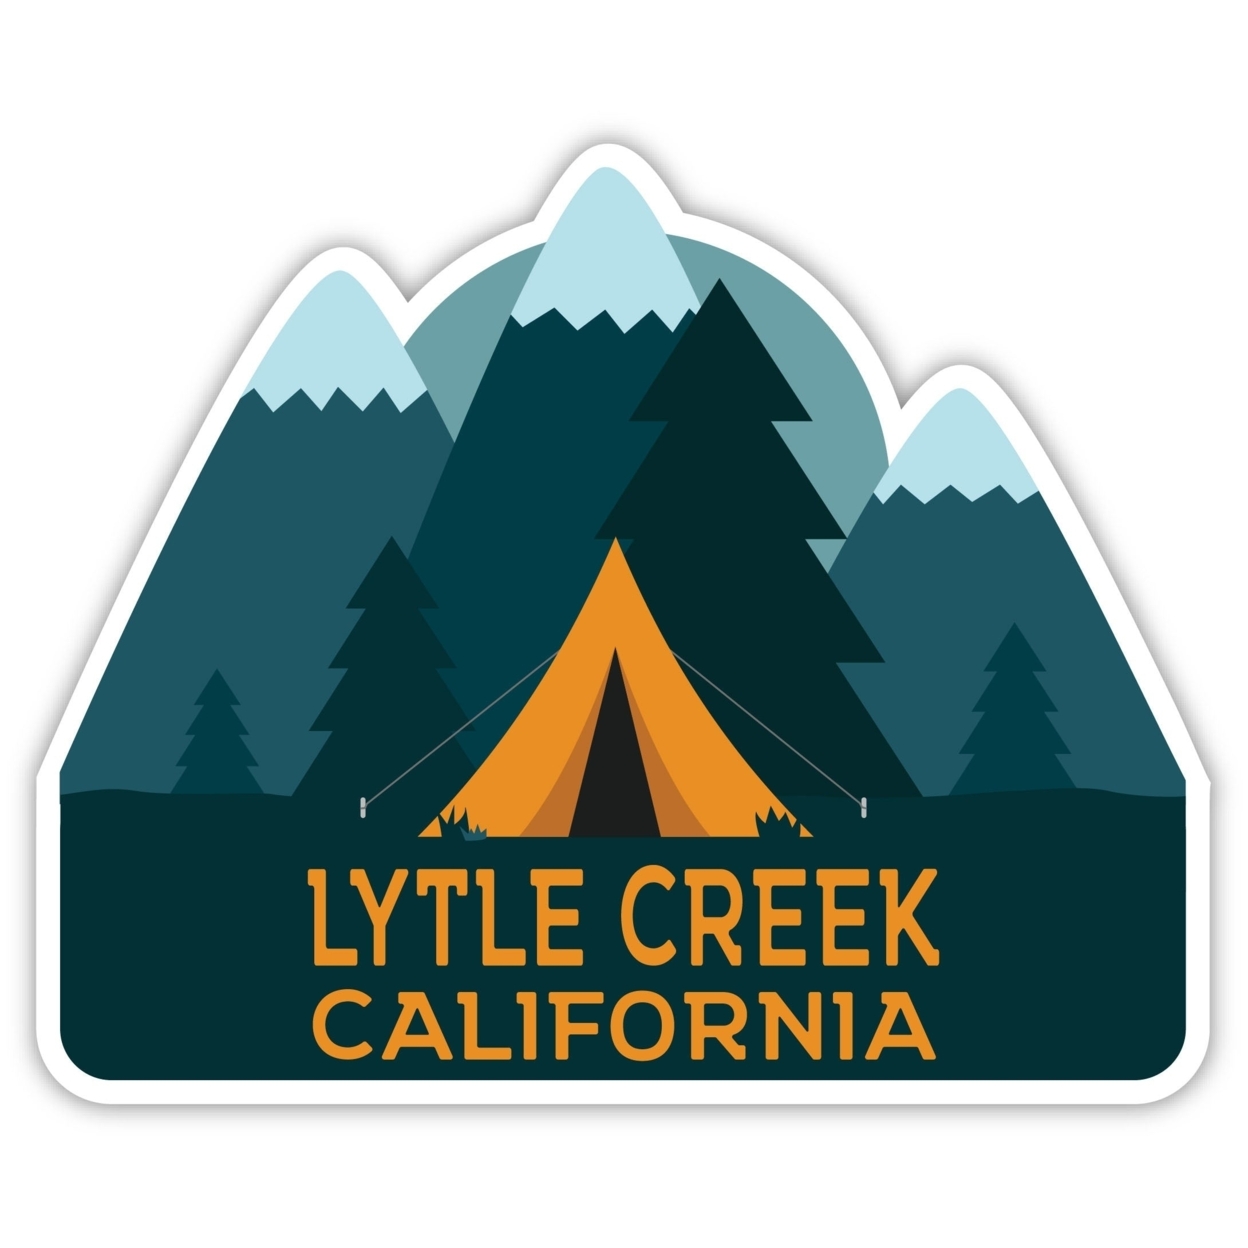 Lytle Creek California Souvenir Decorative Stickers (Choose Theme And Size) - 4-Inch, Adventures Awaits